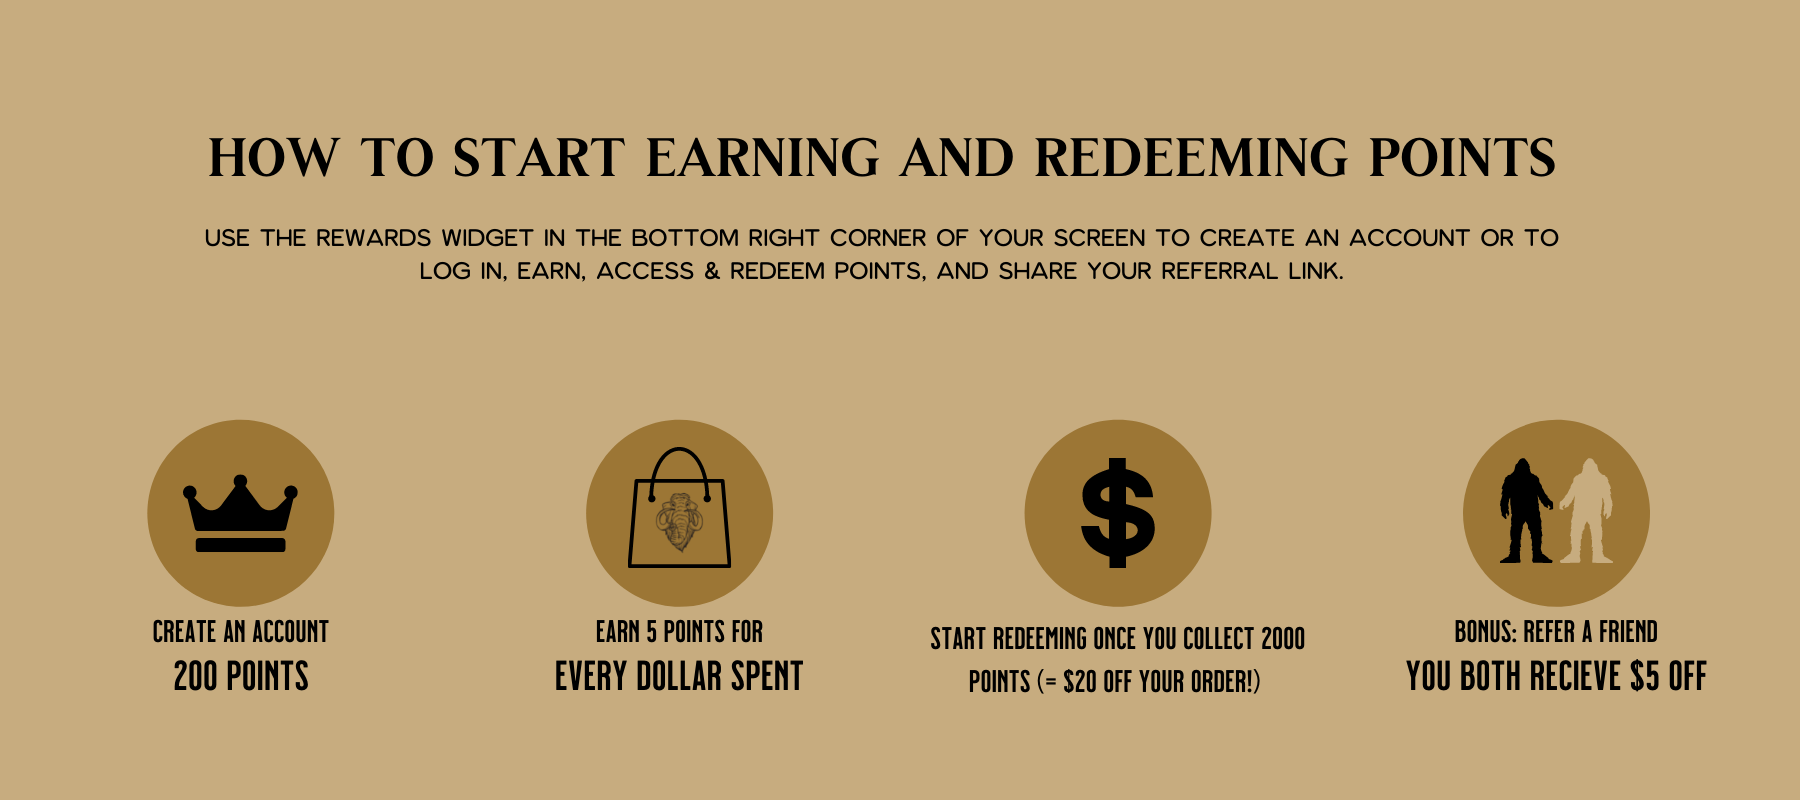 How to Start Earning and redeeming Mammoth Reward Points. Use the rewards widget in the bottom right corner of your screen to create an account or to log in, earn, access & redeem points, and share your referral link.